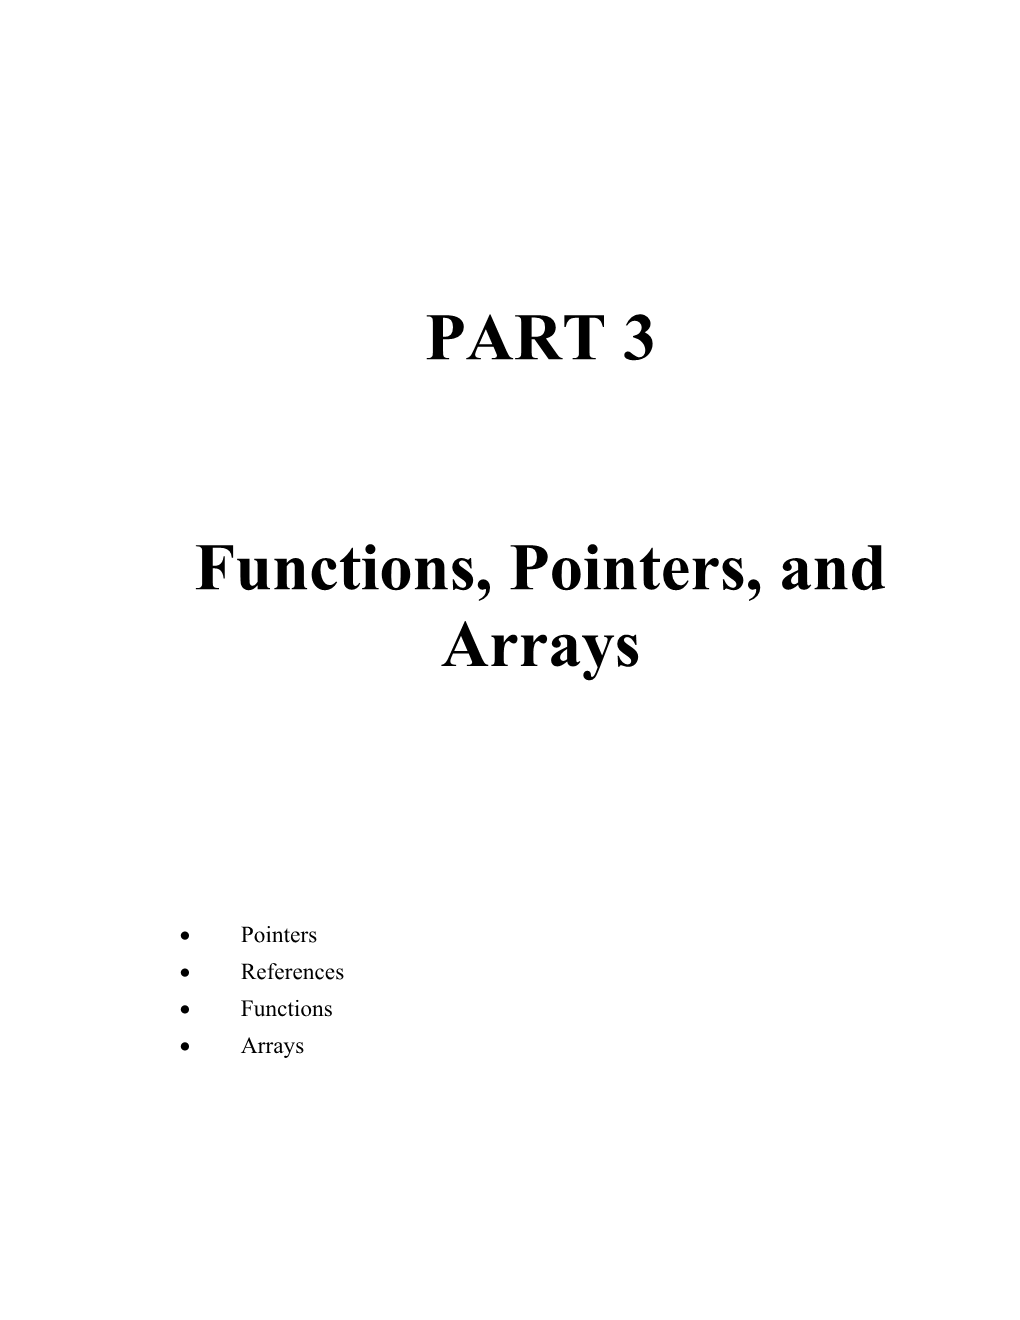 Functions, Pointers, and Arrays